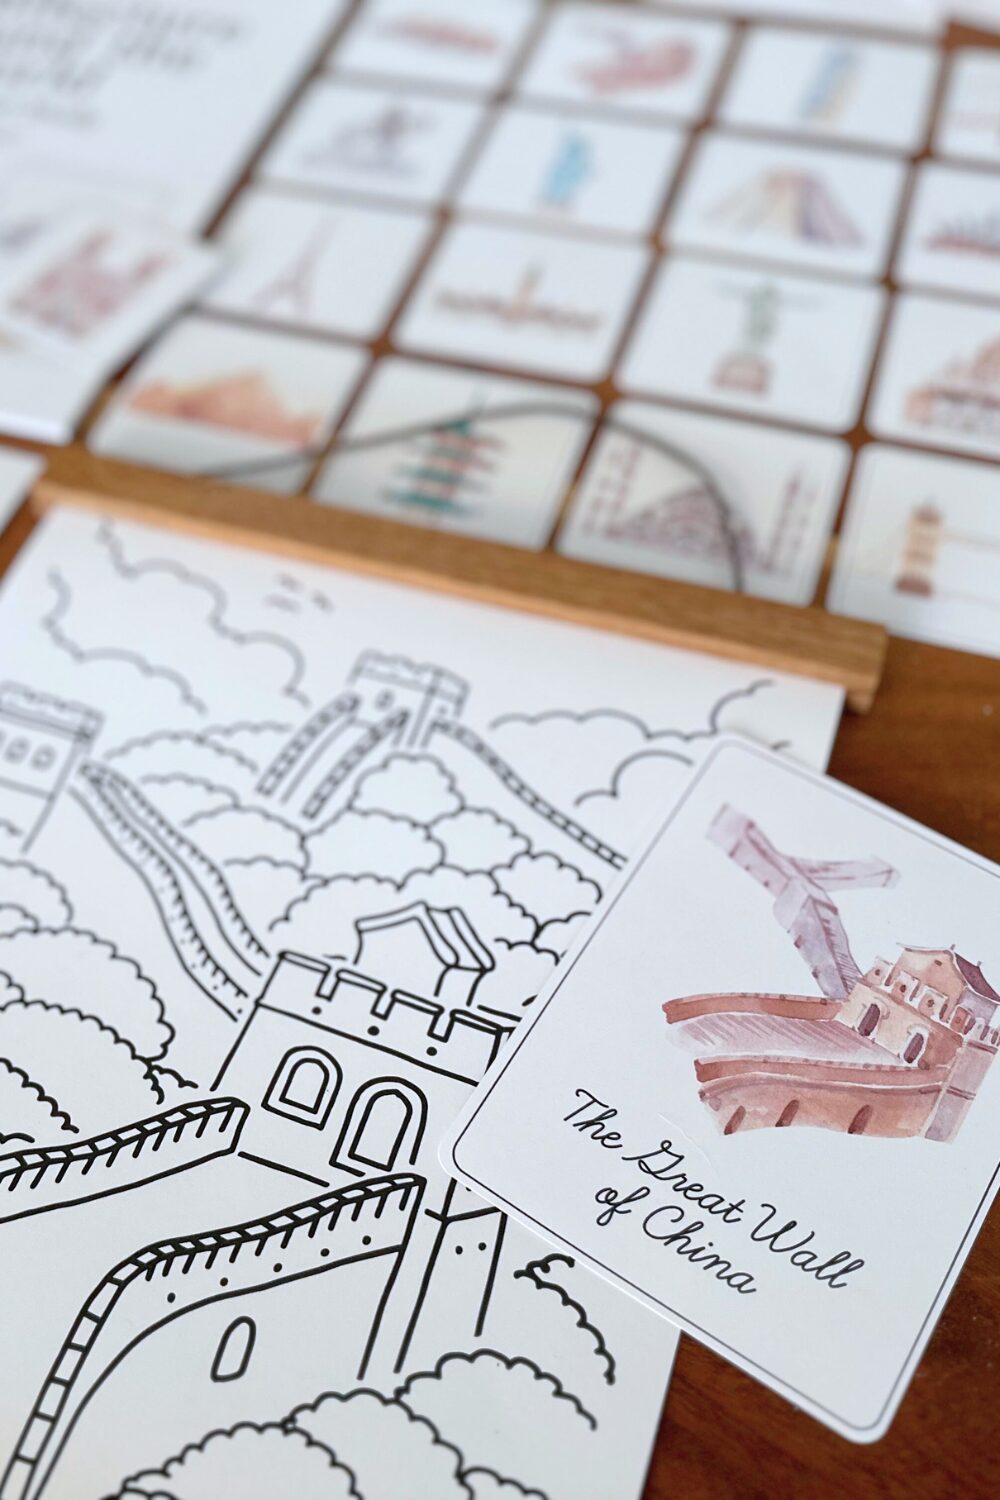 Architecture Around the World: The Great Wall of China Coloring Page and Vocabulary Card